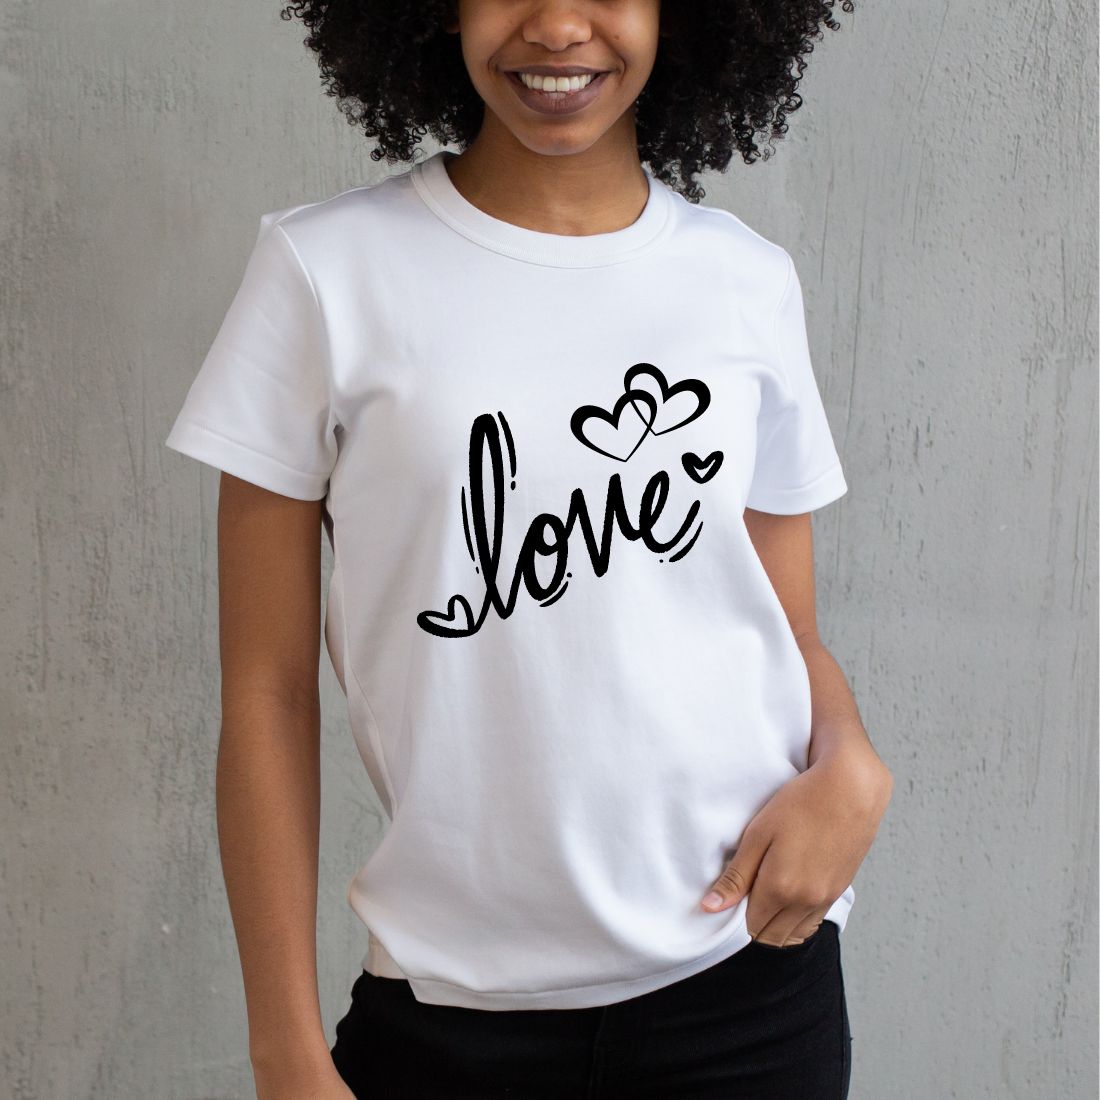 Love t-shirt design preview image.